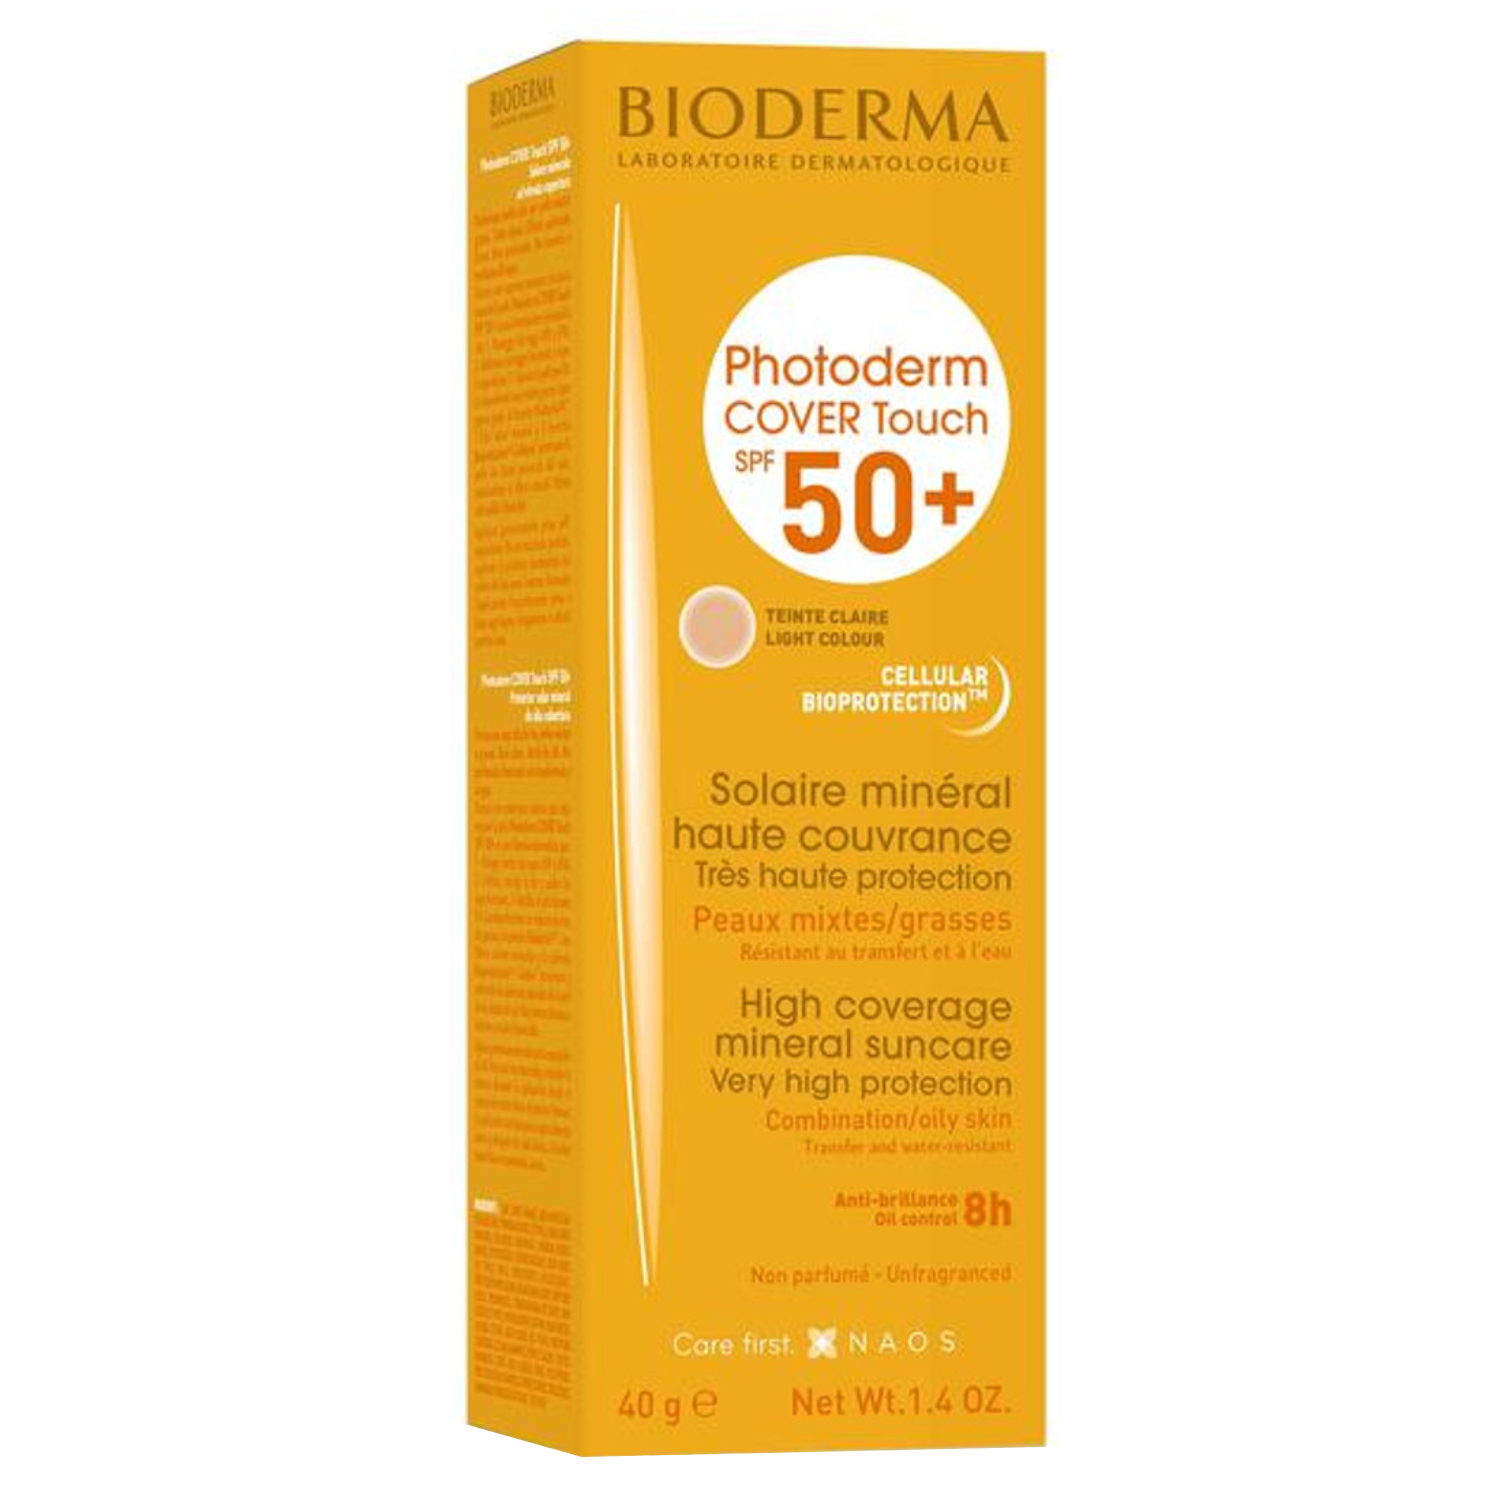 Bioderma Photoderm Cover Touch SPF 50+ light Tinted 40g